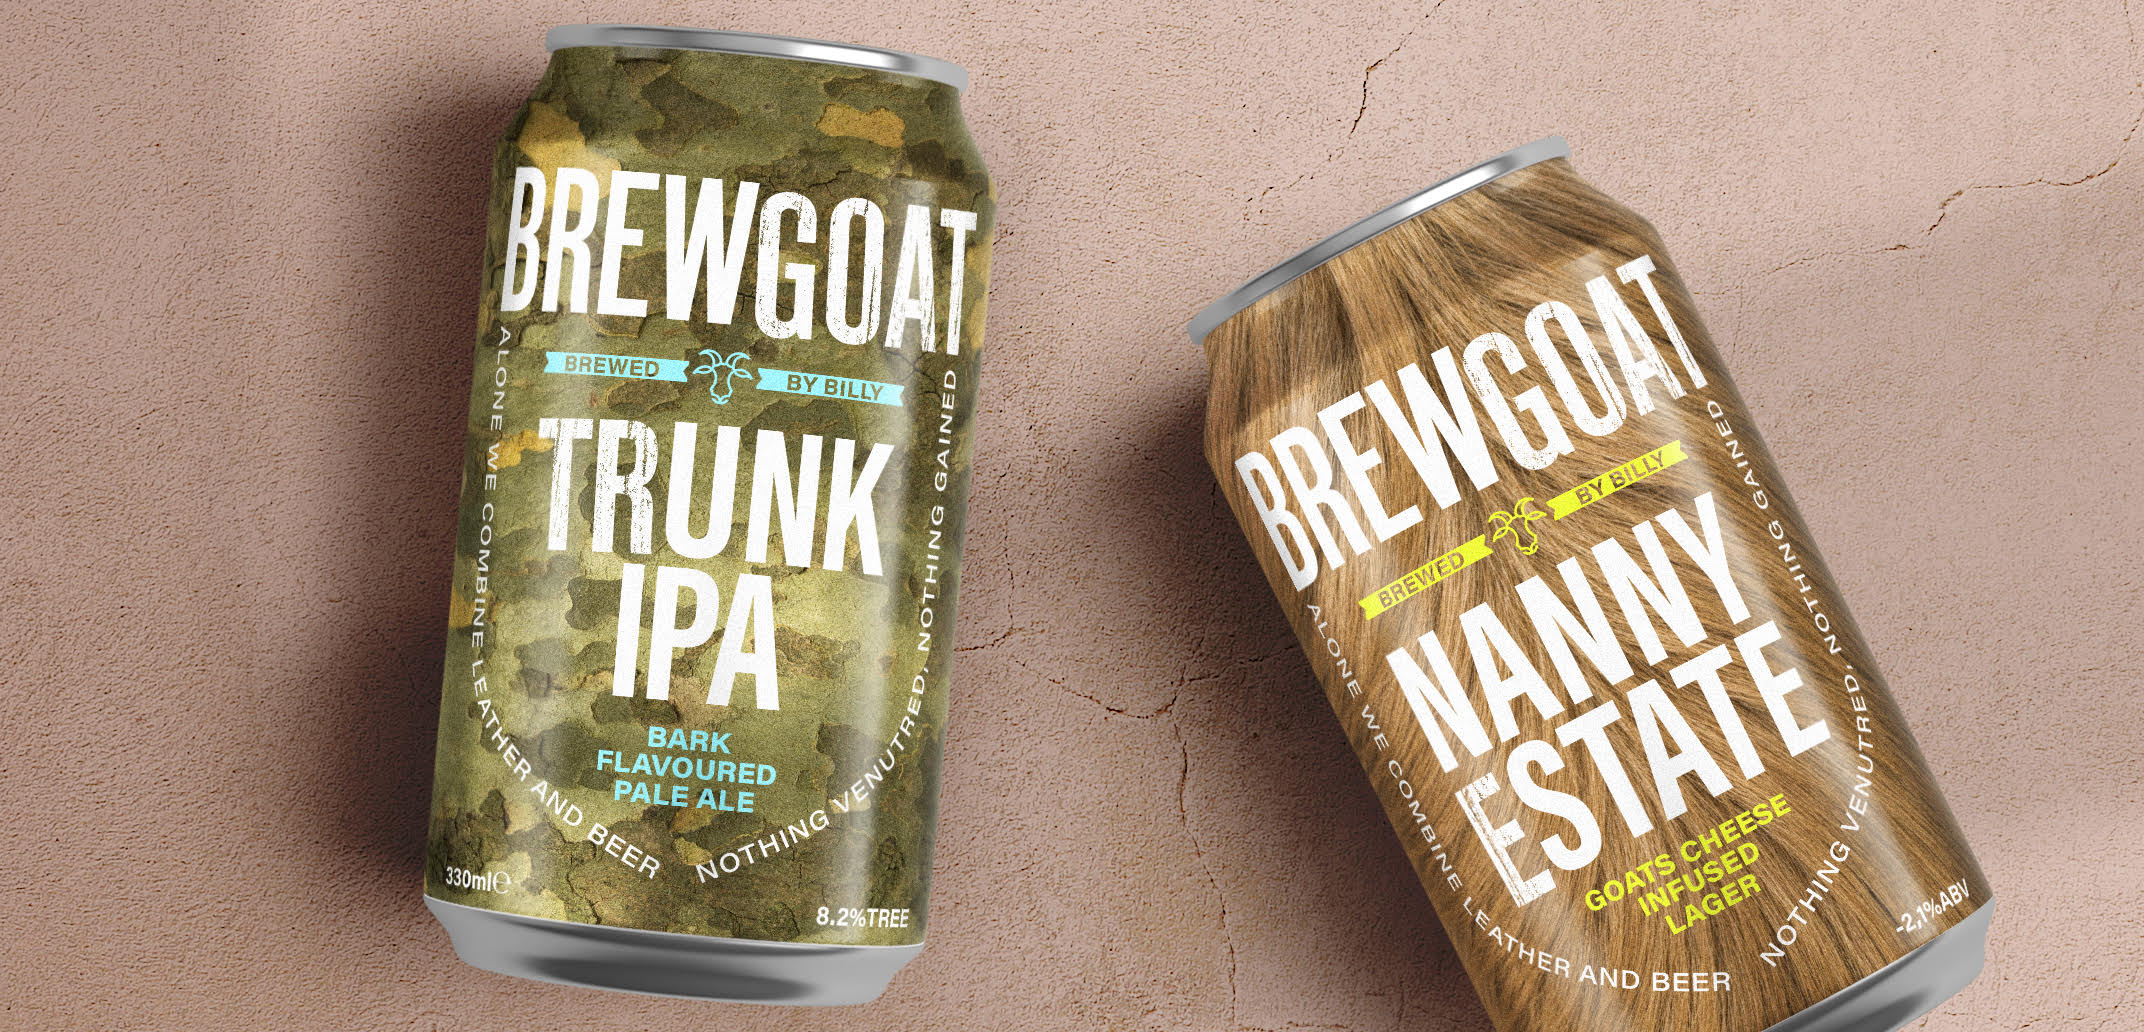 Introducing BREWGOAT: Our new beer